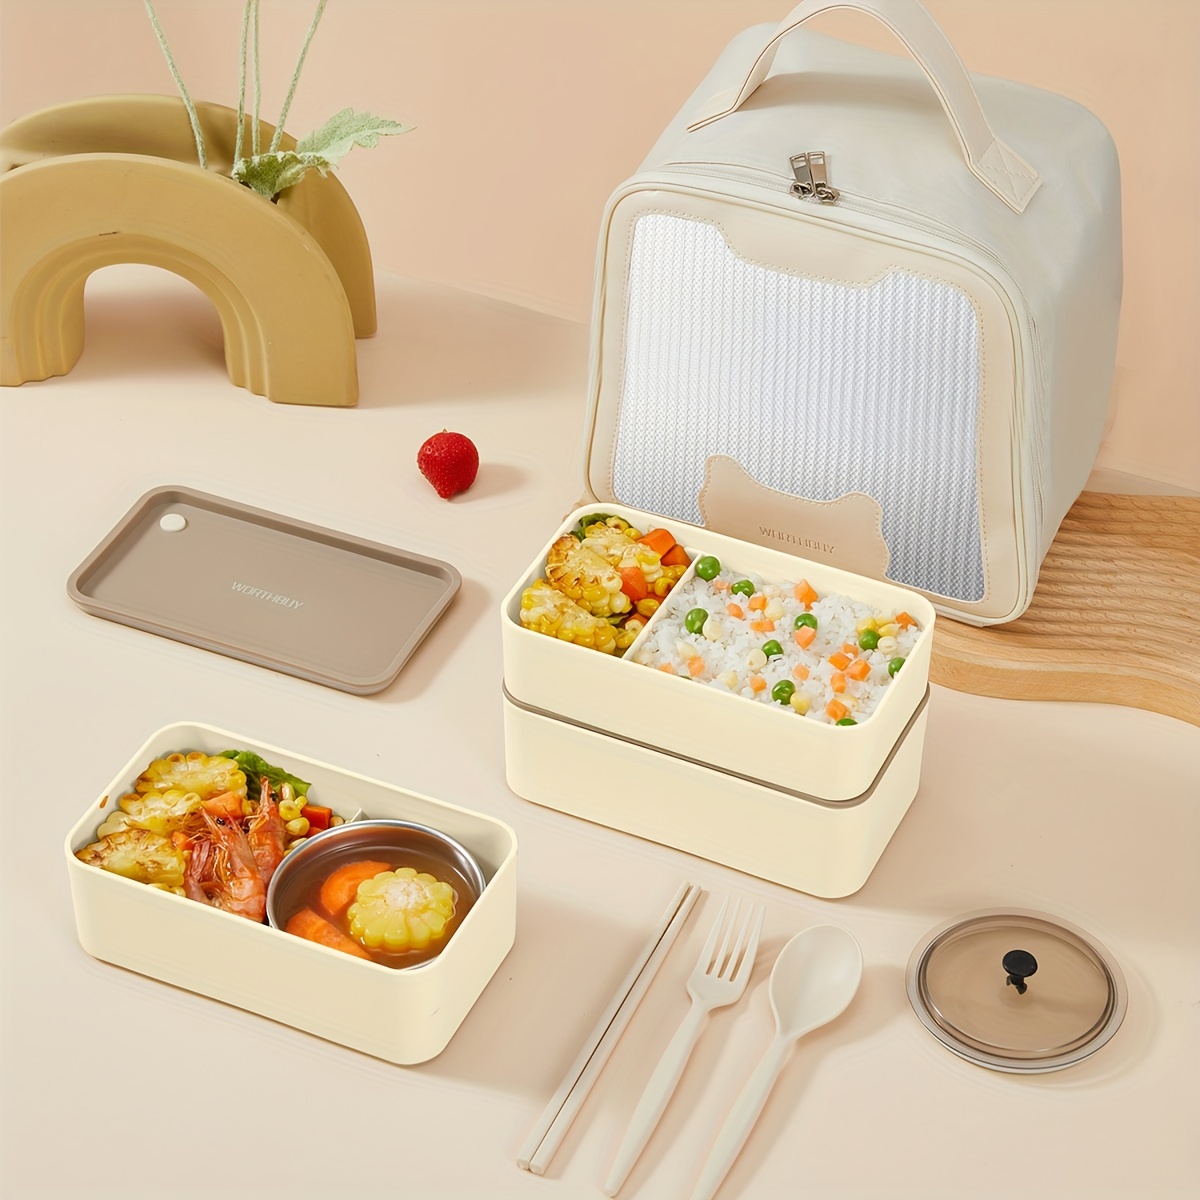 Korean-style Portable Lunch Box, Lunch Box, Sealed Microwave Oven Heating  Box With Soup Spoon, Bento Box, Leakproof Food Container, For Teenagers And  Workers At School,canteen, Back School, For Camping And Picnic, Home